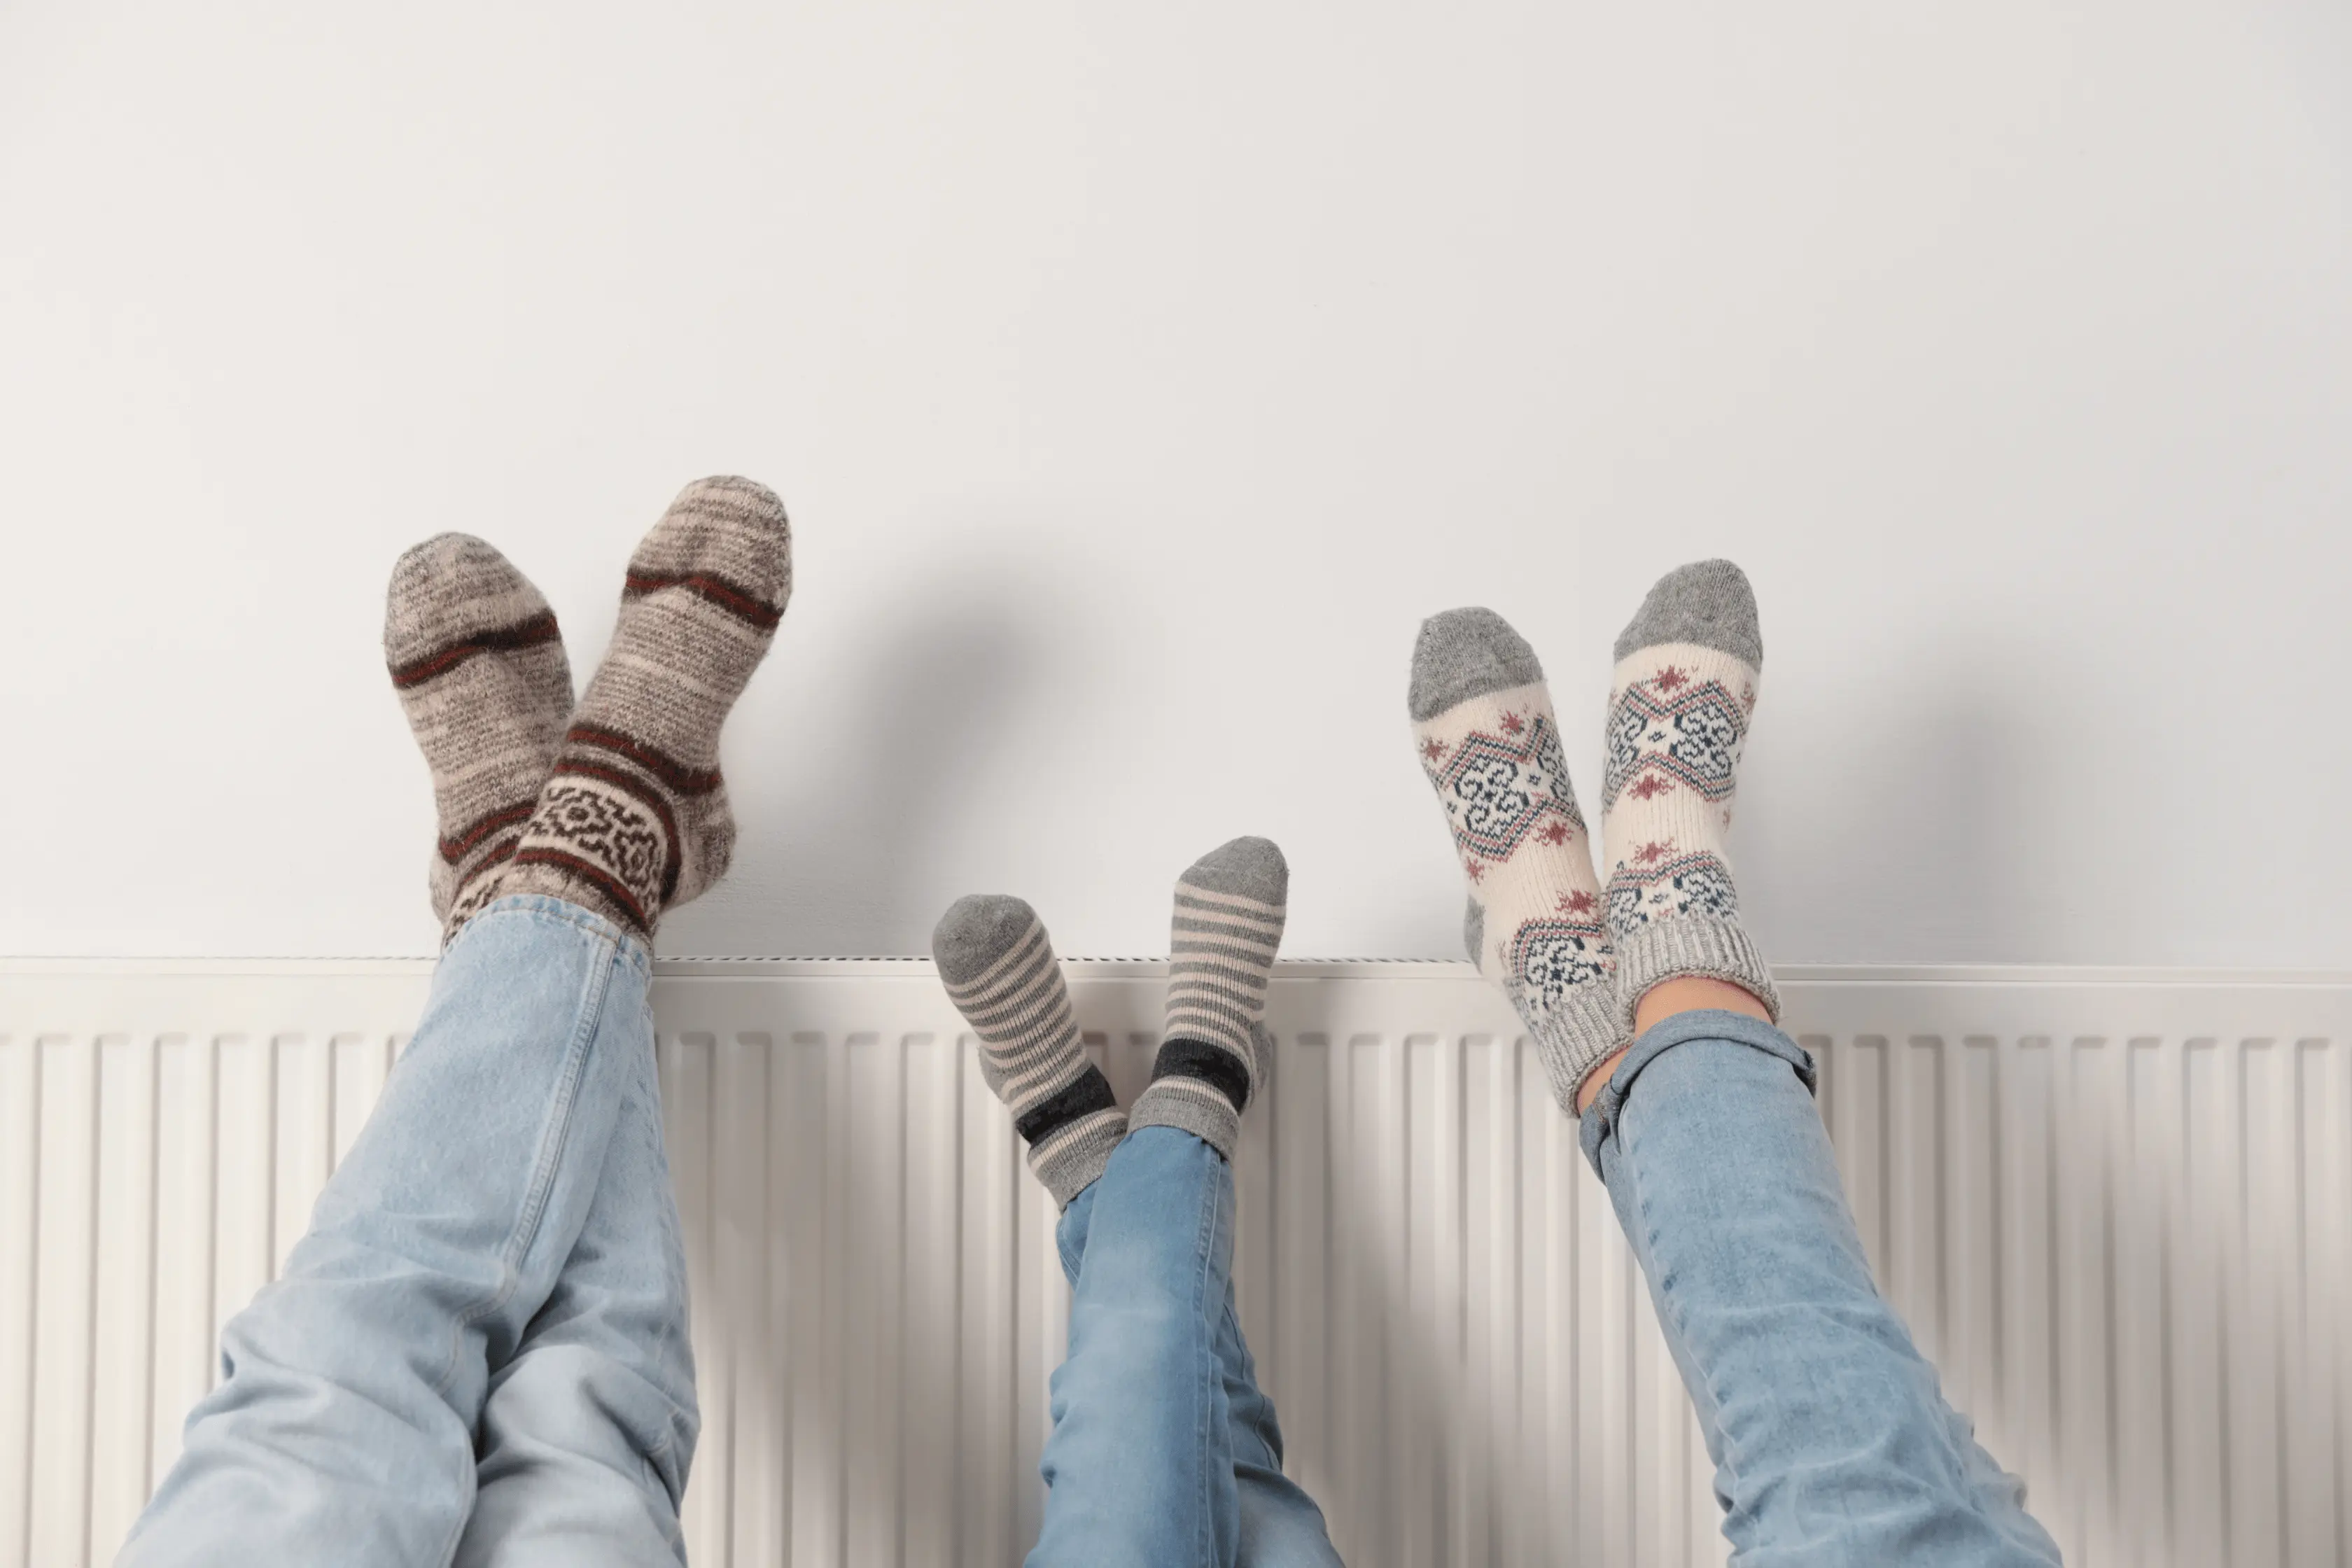 Home Radiator With Homeowners Feet Resting On Top